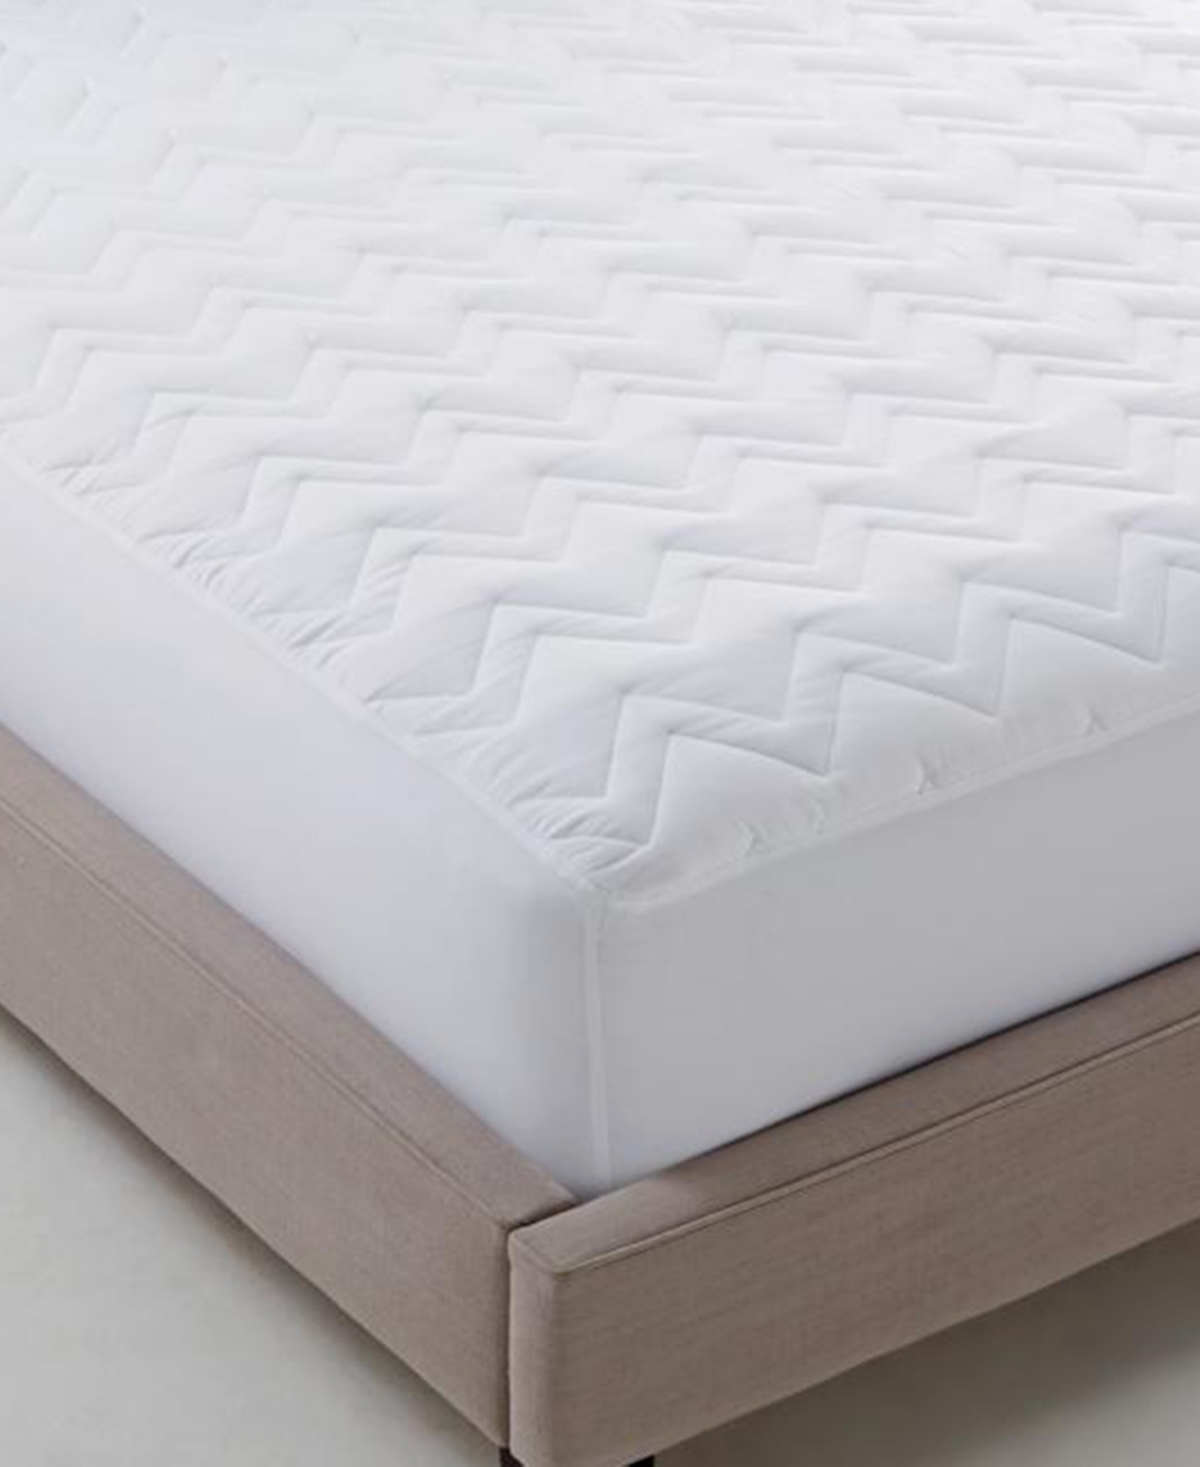 Shop Home Design Easy Care Classic Mattress Pads, Queen, Created For Macy's In White